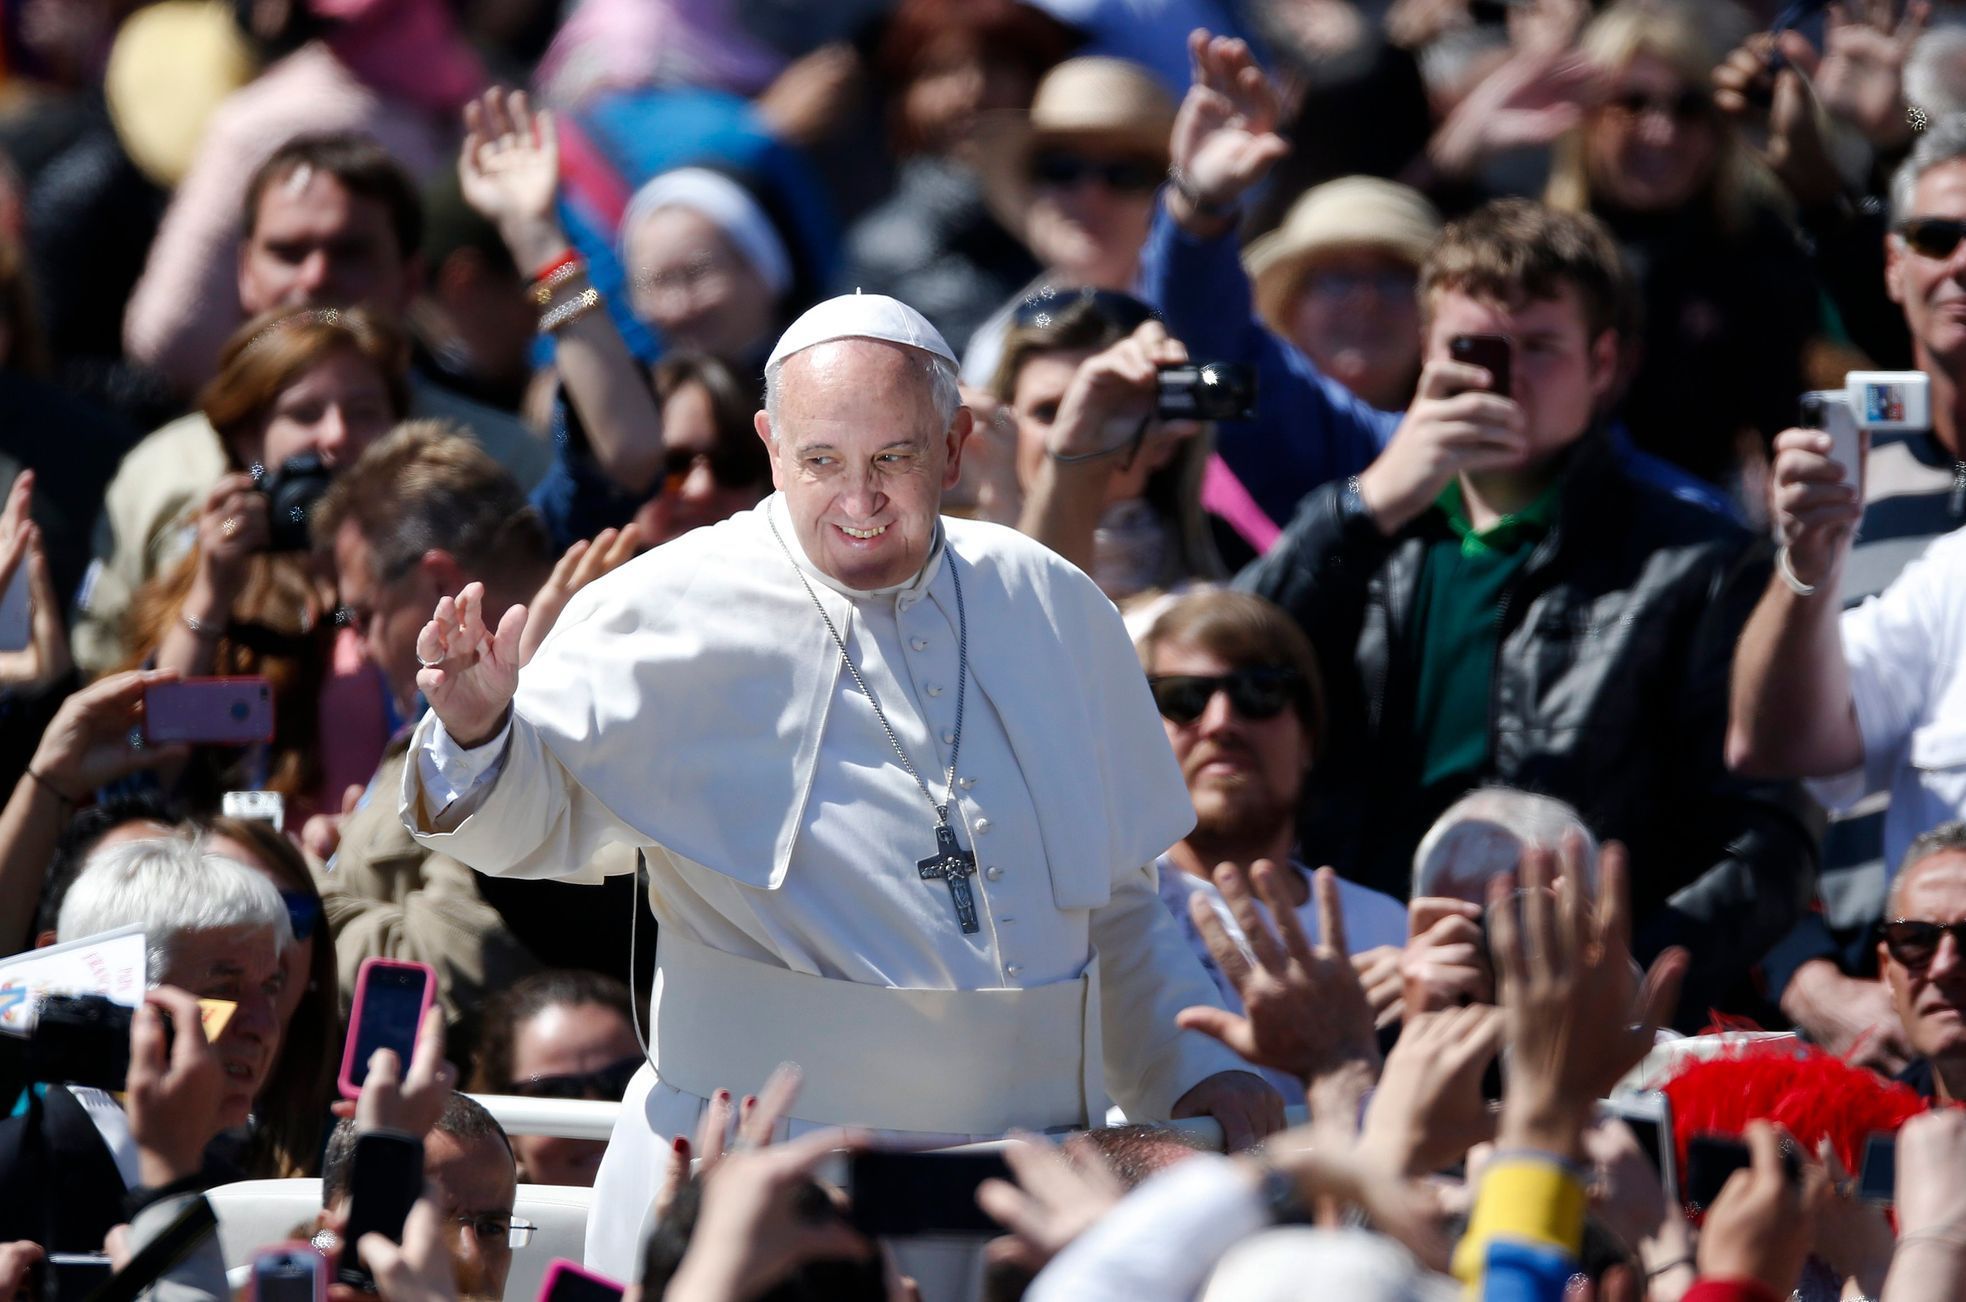 Pope Francis waves as he leads the Easter Mass in Saint Peter's Square at the Vatican